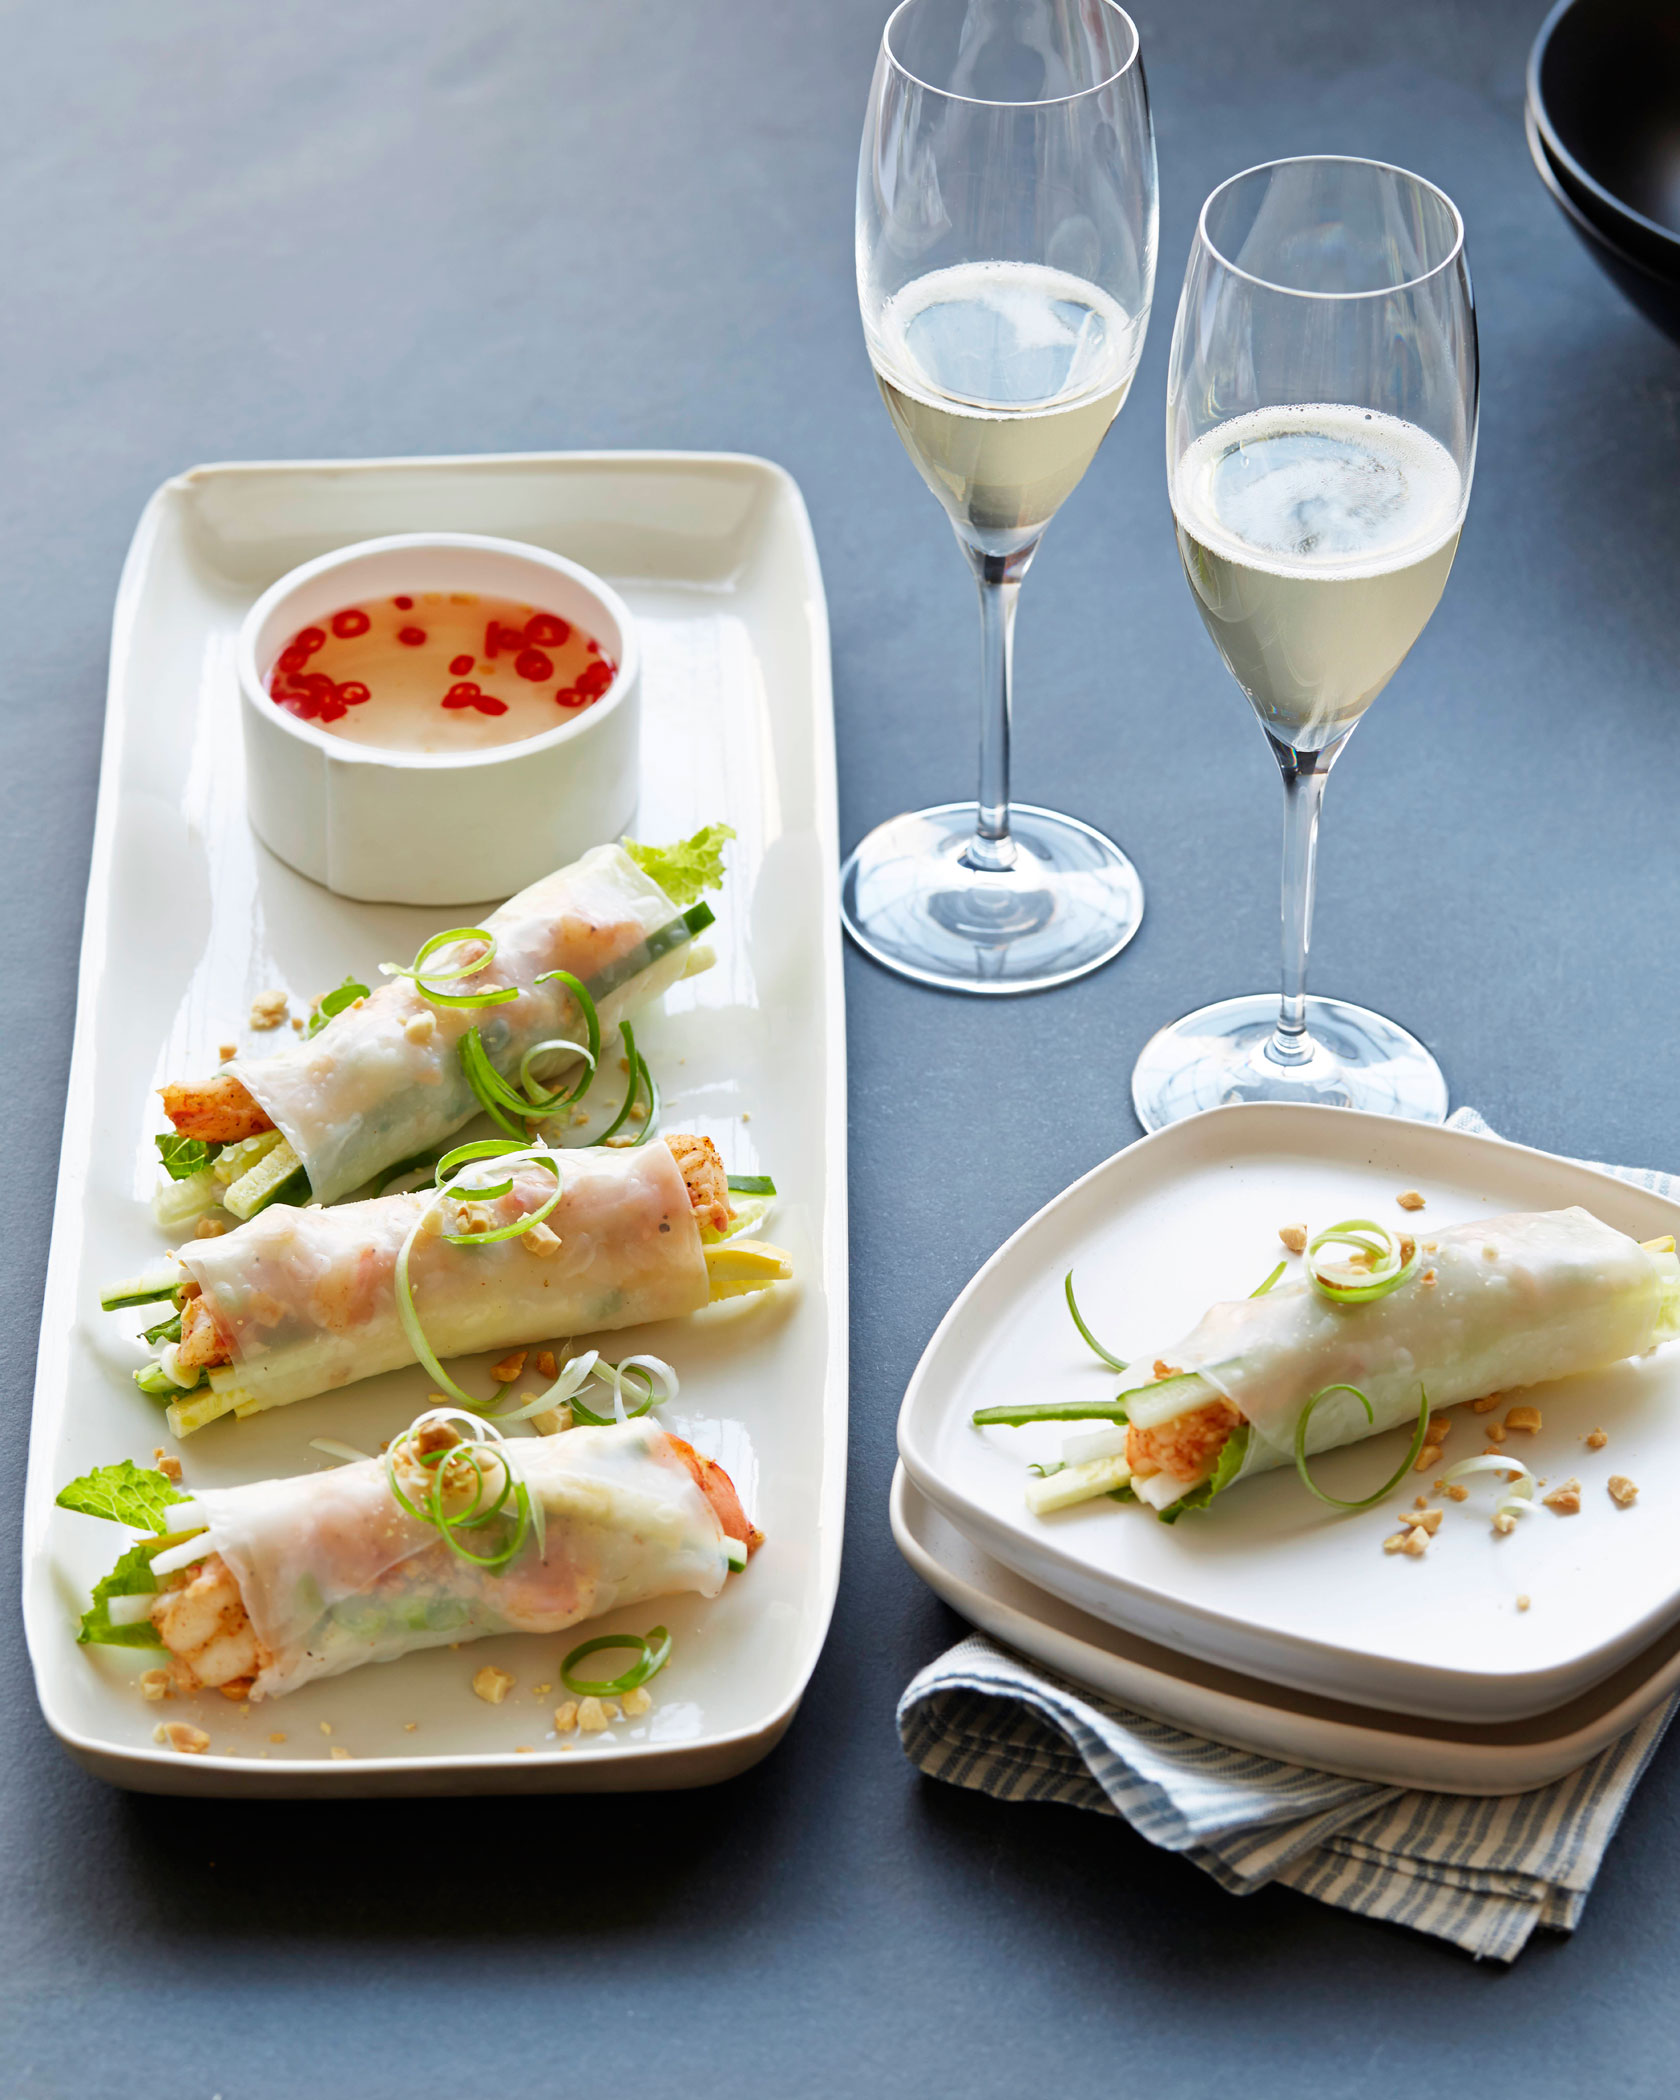 Rice Paper Rolls filled with Pepper Dusted Prawns and Matchstick Vegetables with a Sweet Chile Sauce